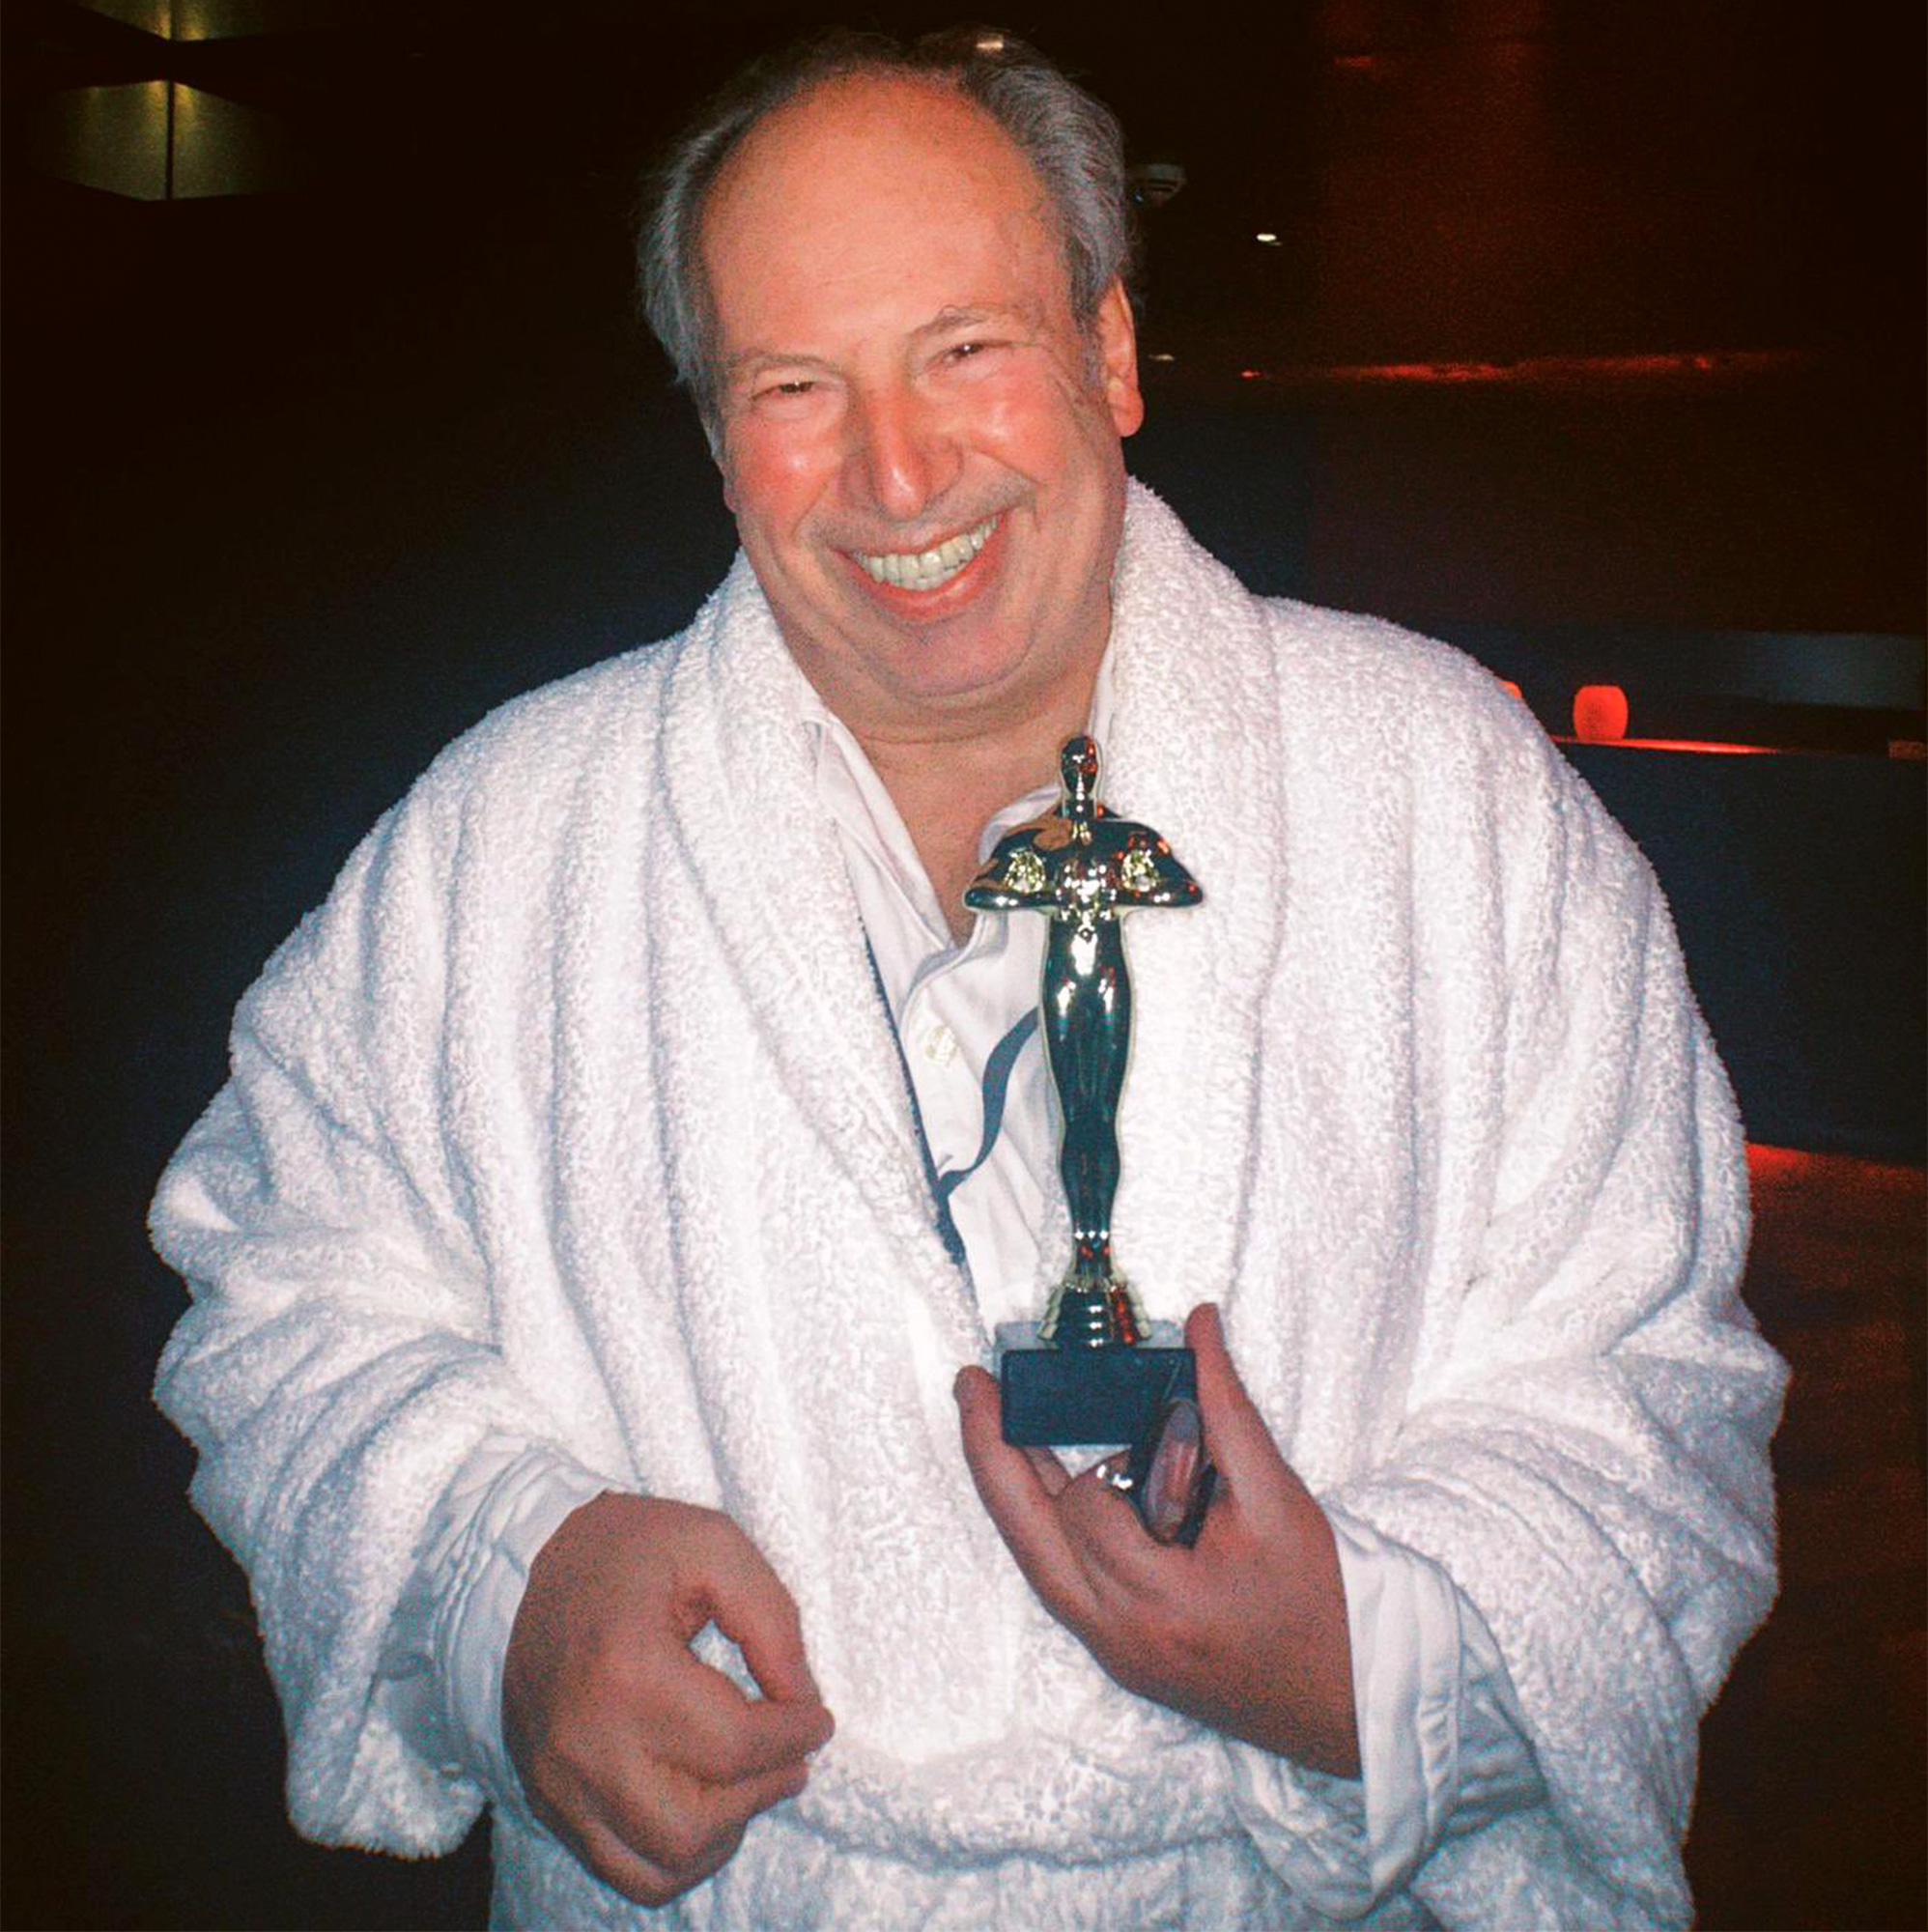 Hans Zimmer accepts his award in a gown.